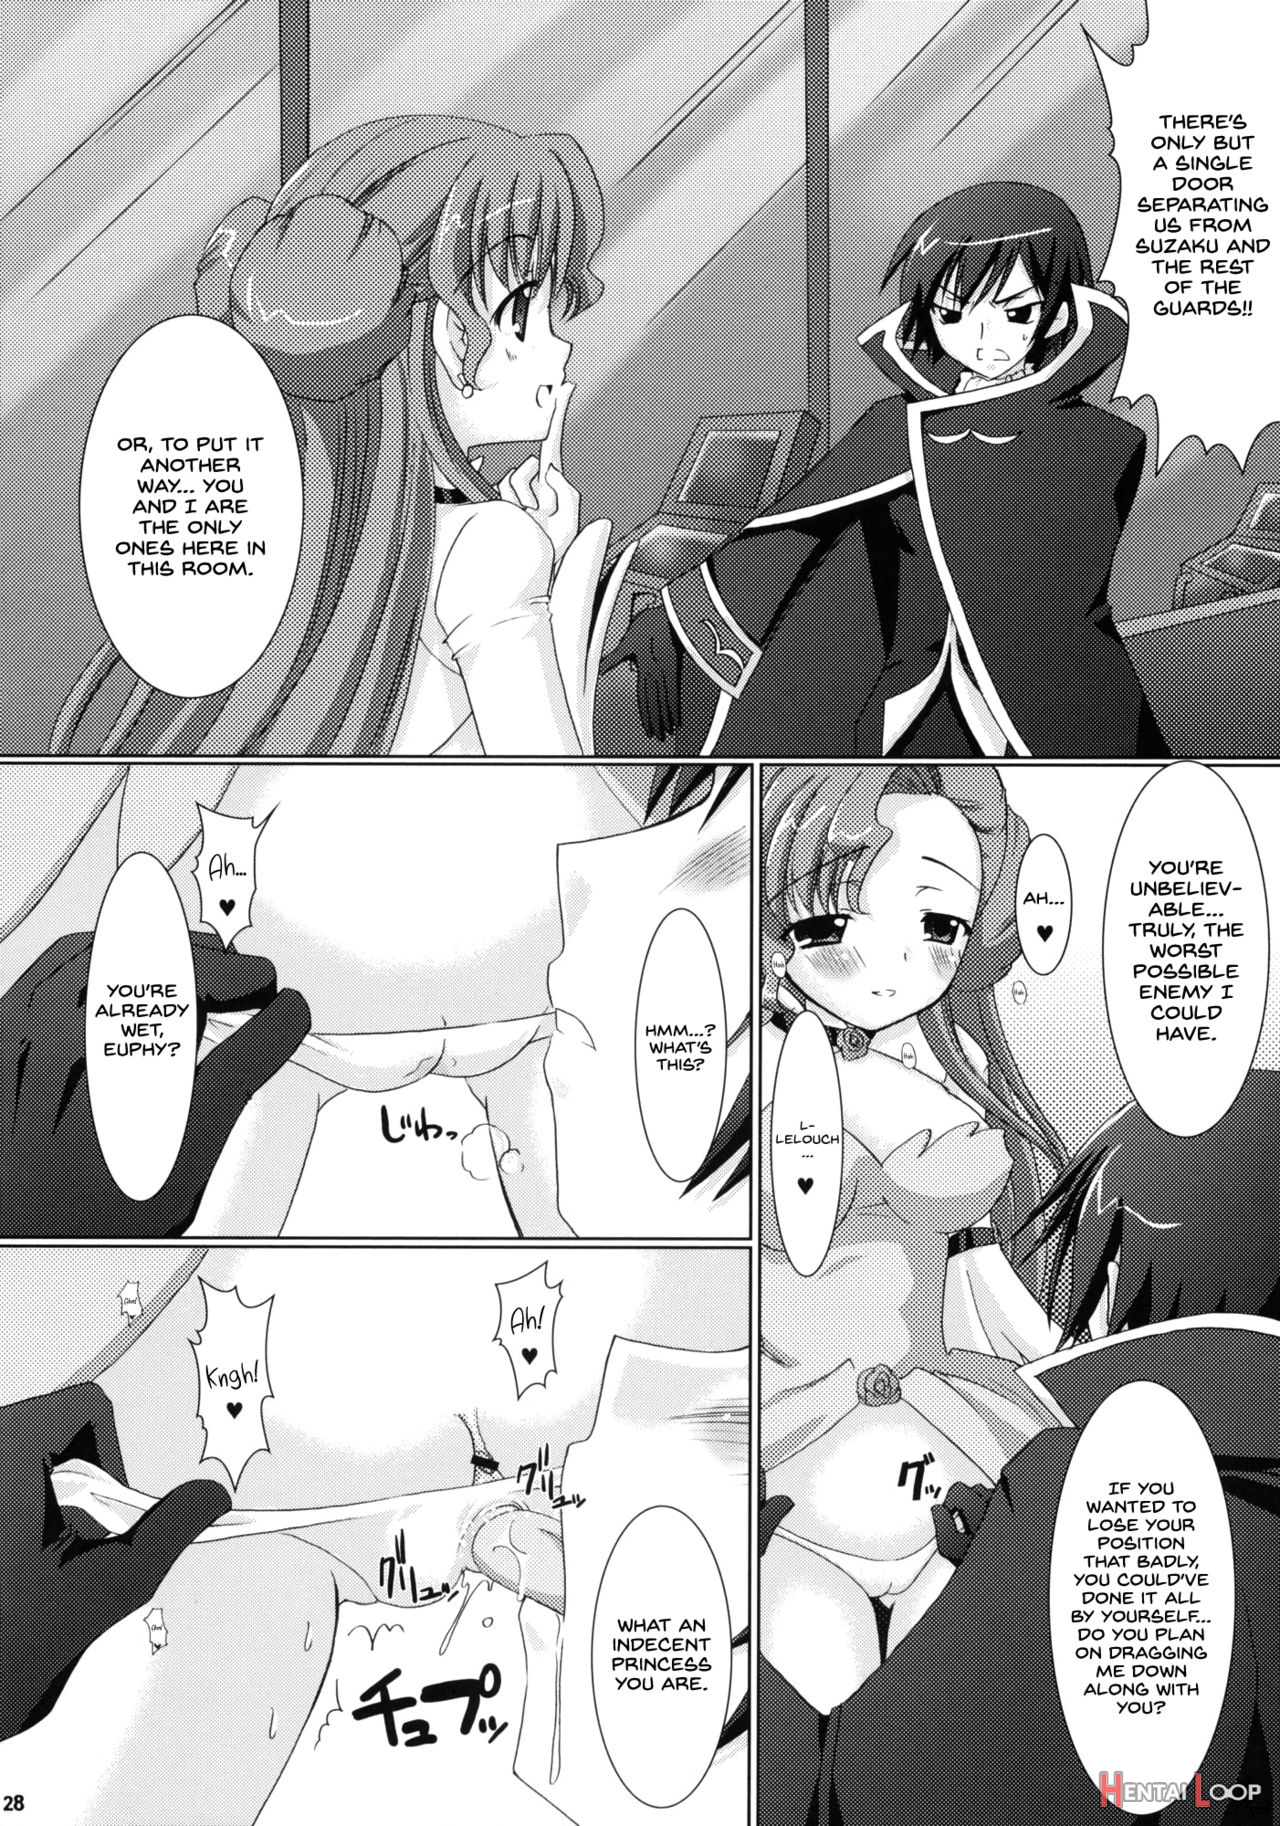 Kouhime Kyouhime page 28